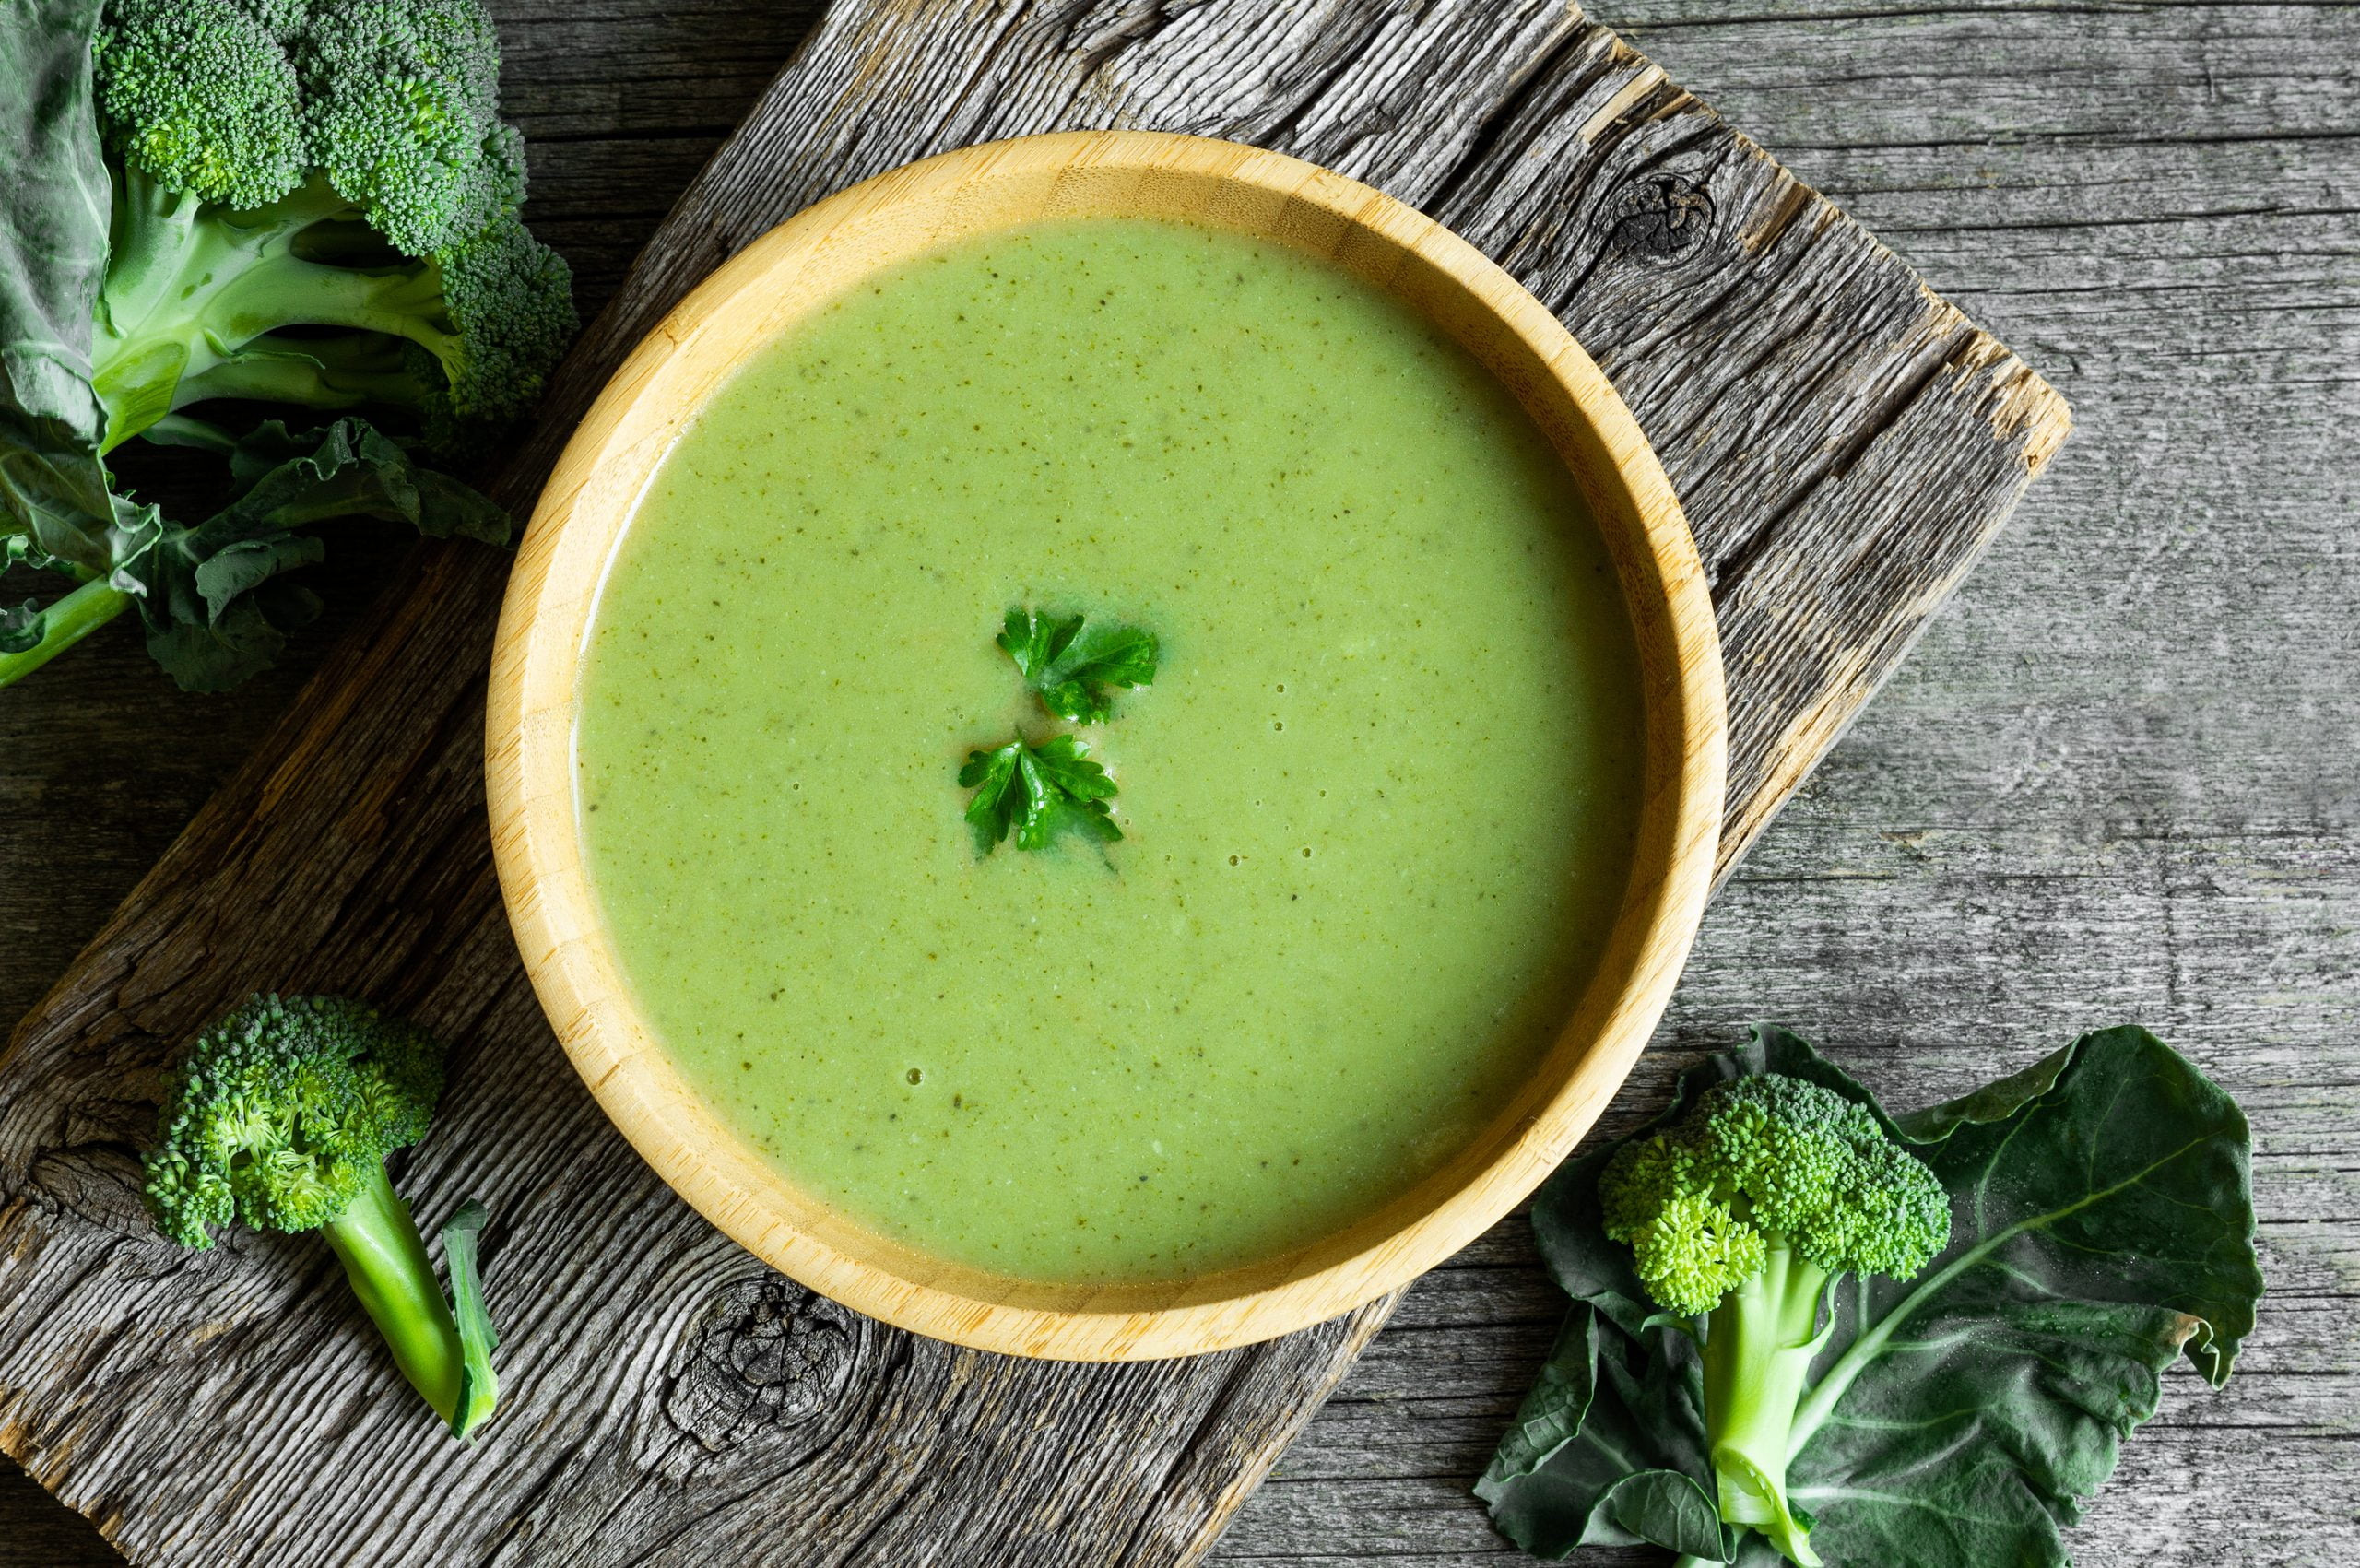 Your new favorite broccoli (with fresh fennel) soup recipe